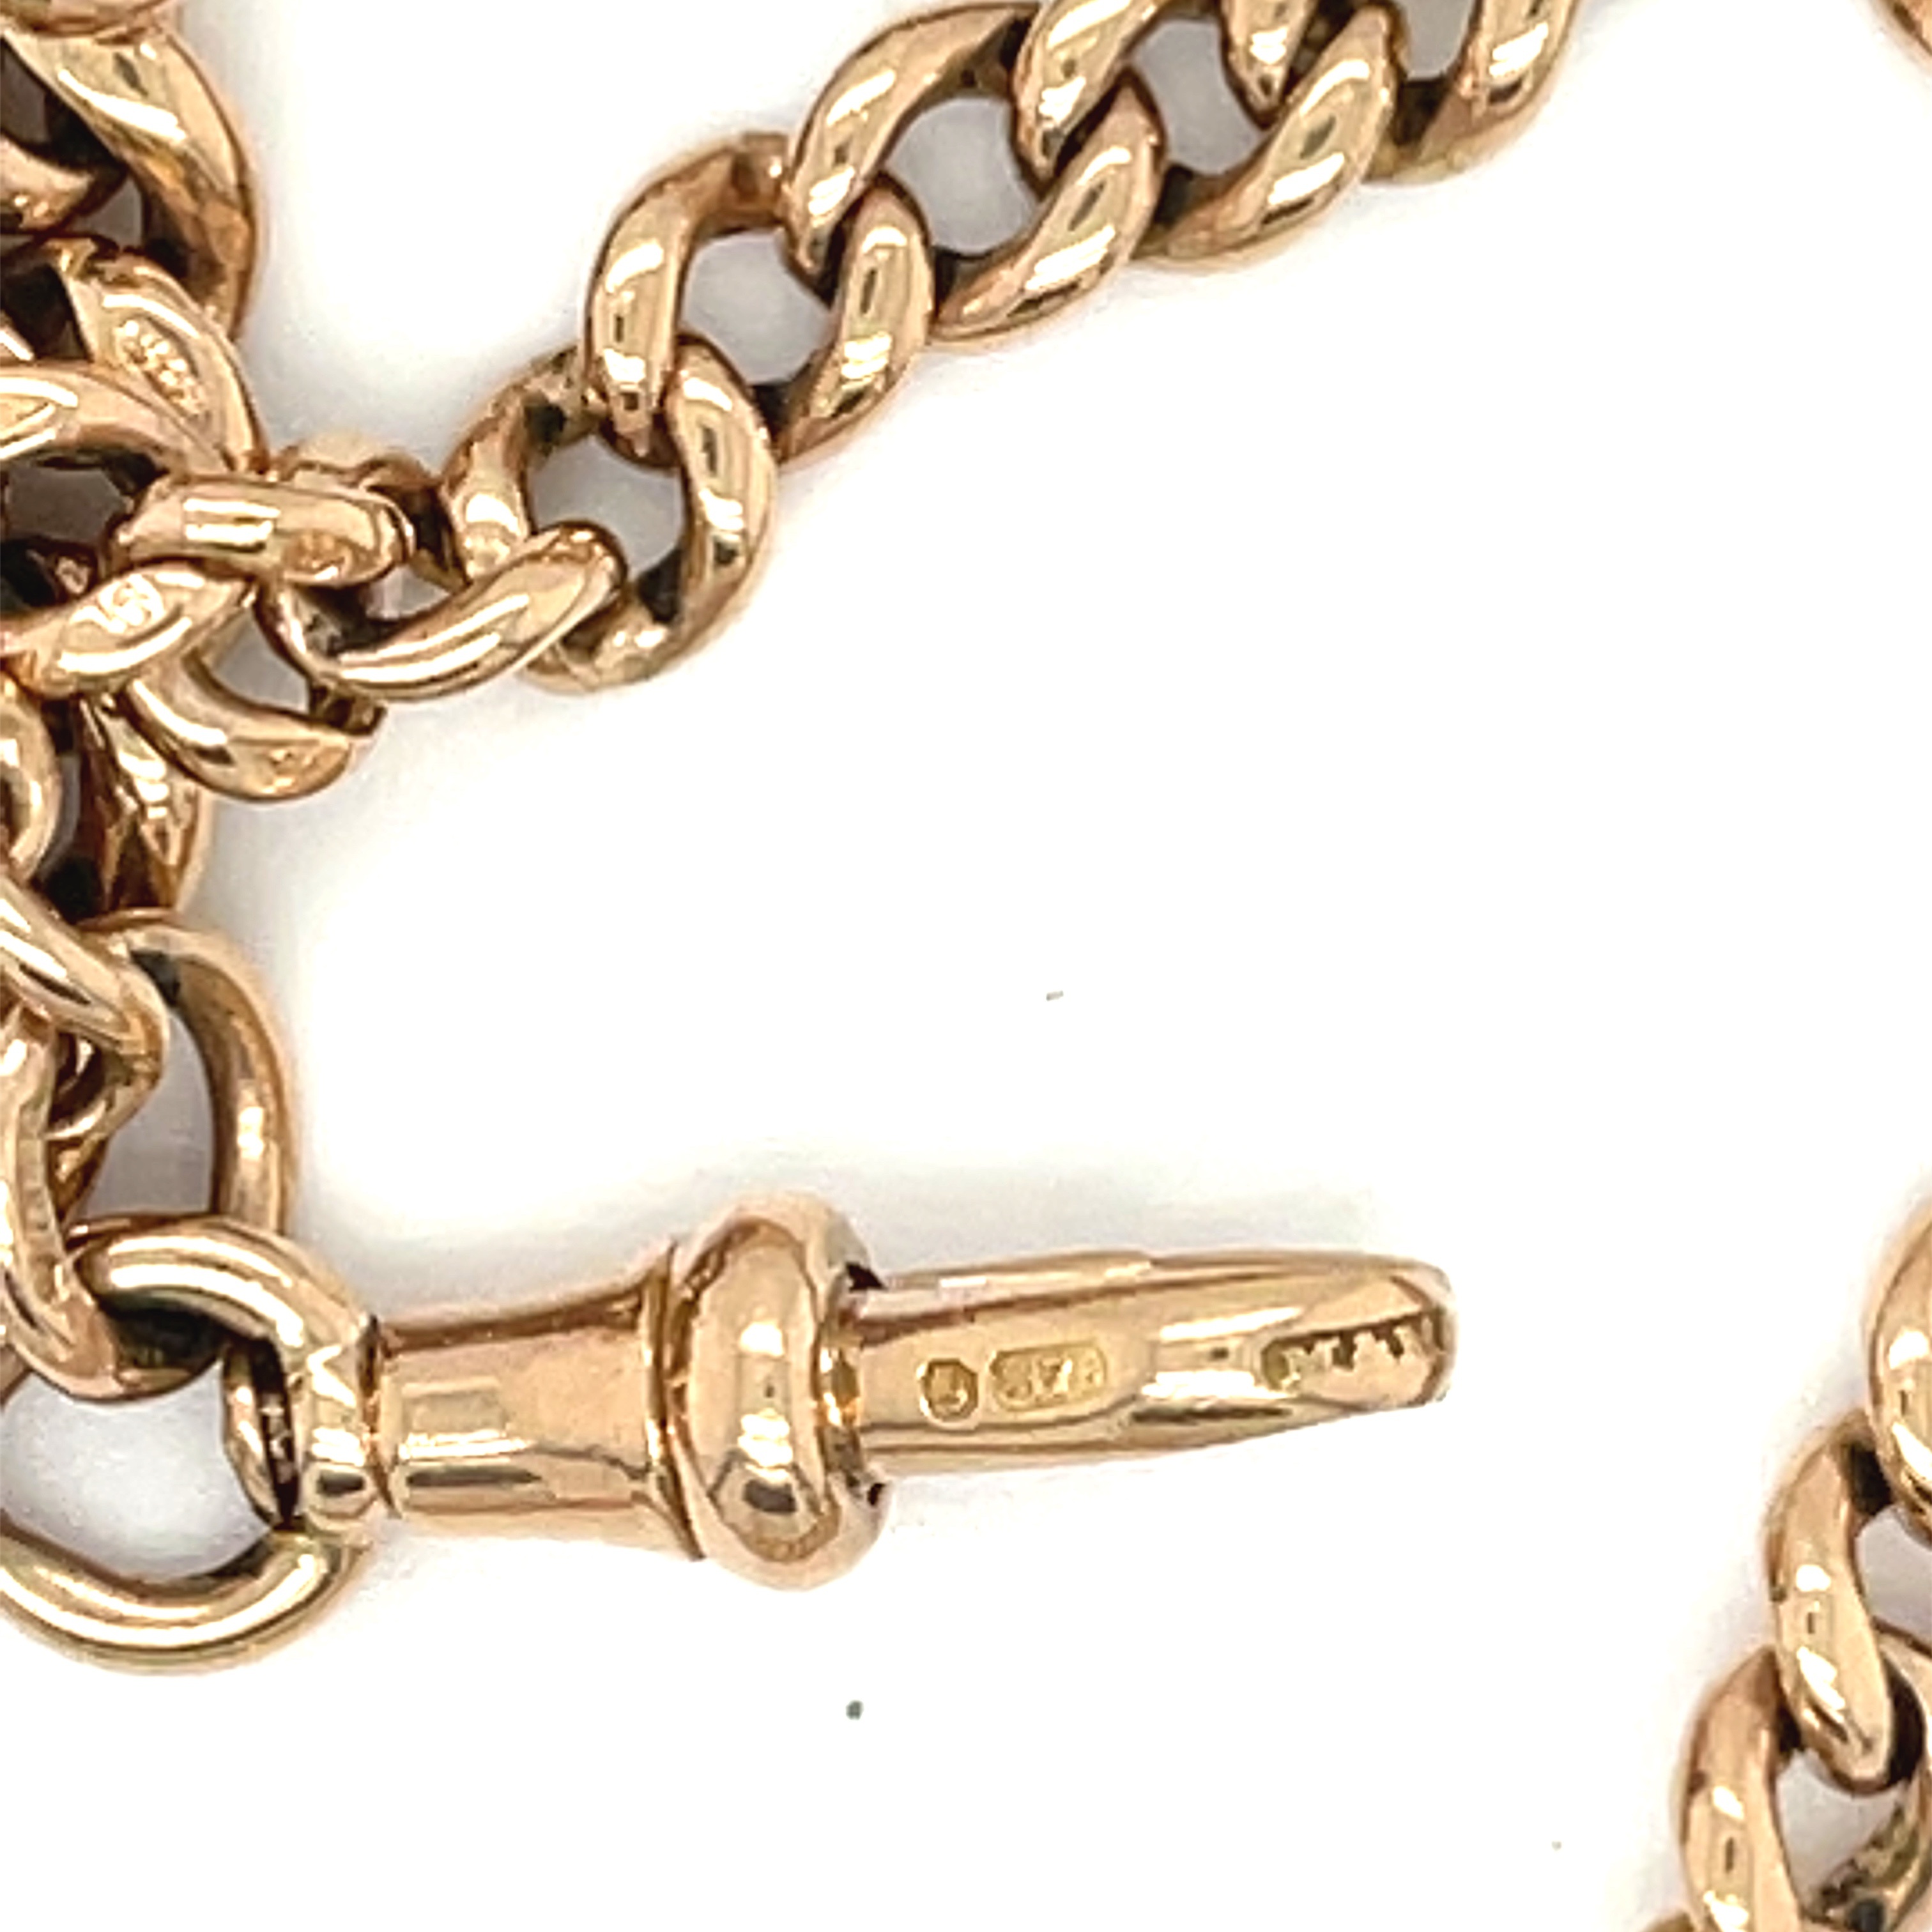 Antique 9ct Gold Watch Chain - 45.5cm long and weighing 27.4 grams. - Image 2 of 6